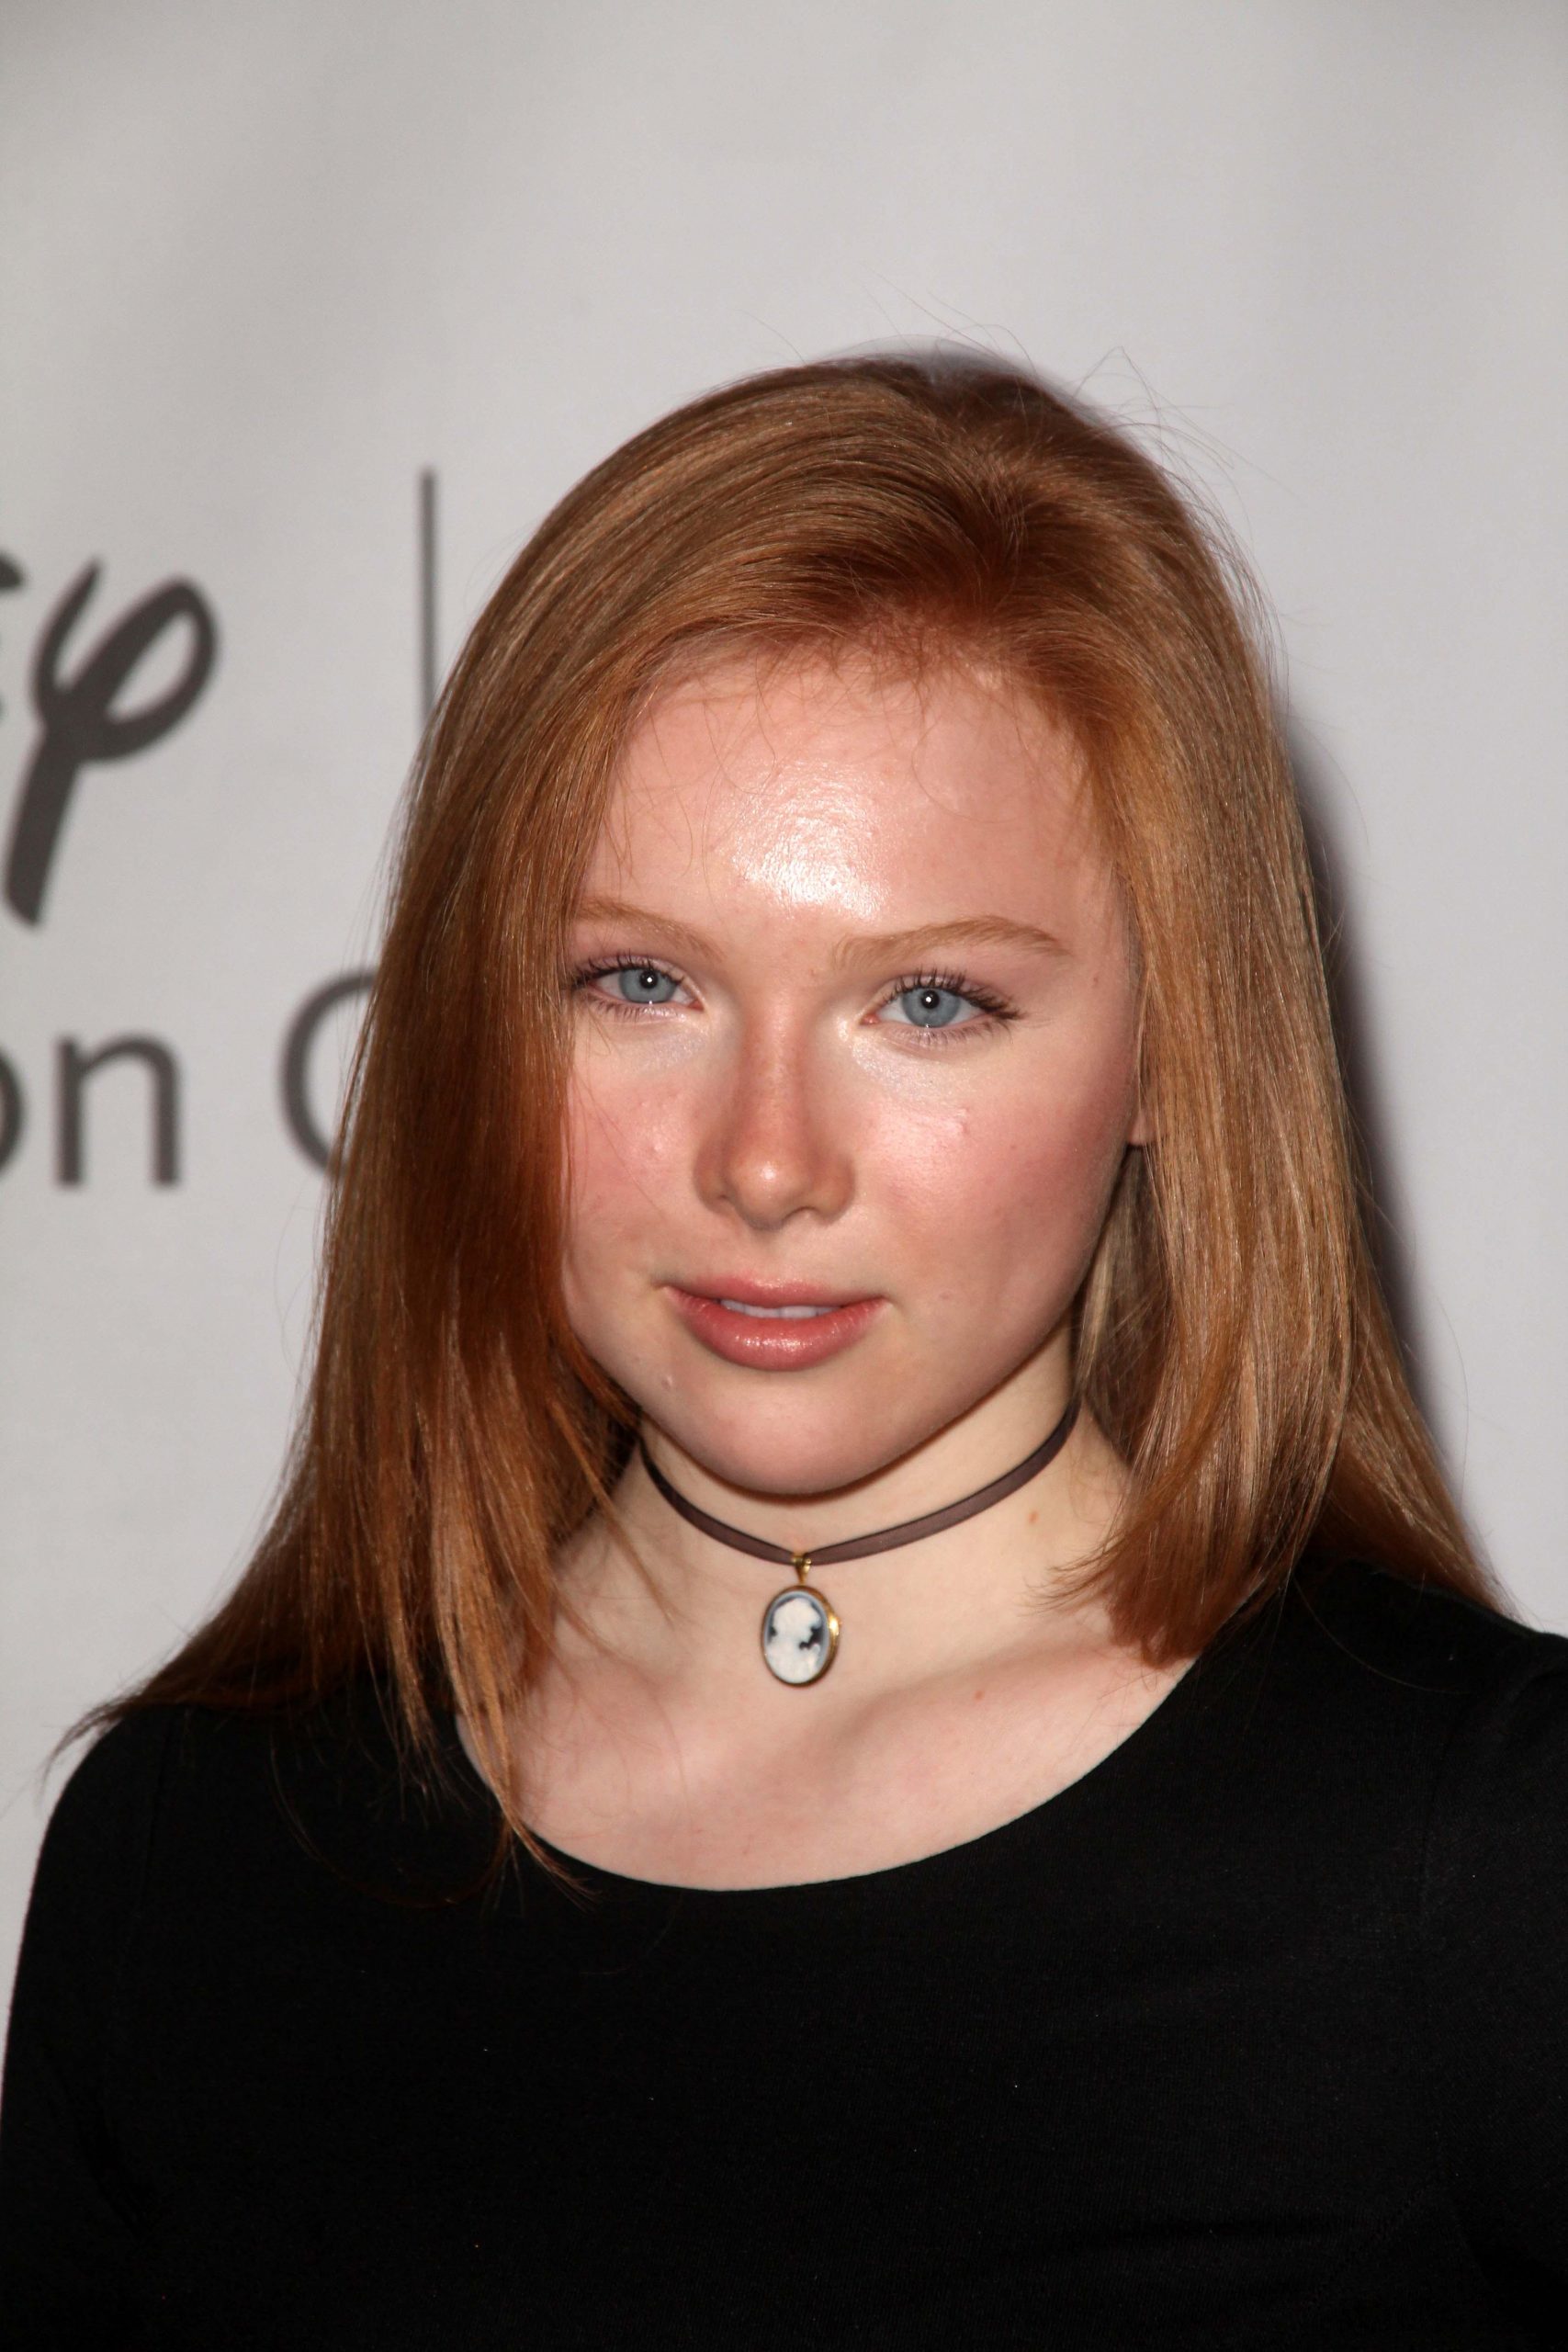 70+ Hot Pictures Of Molly C. Quinn Are God’s Gift For Her Die Hard Fans 112